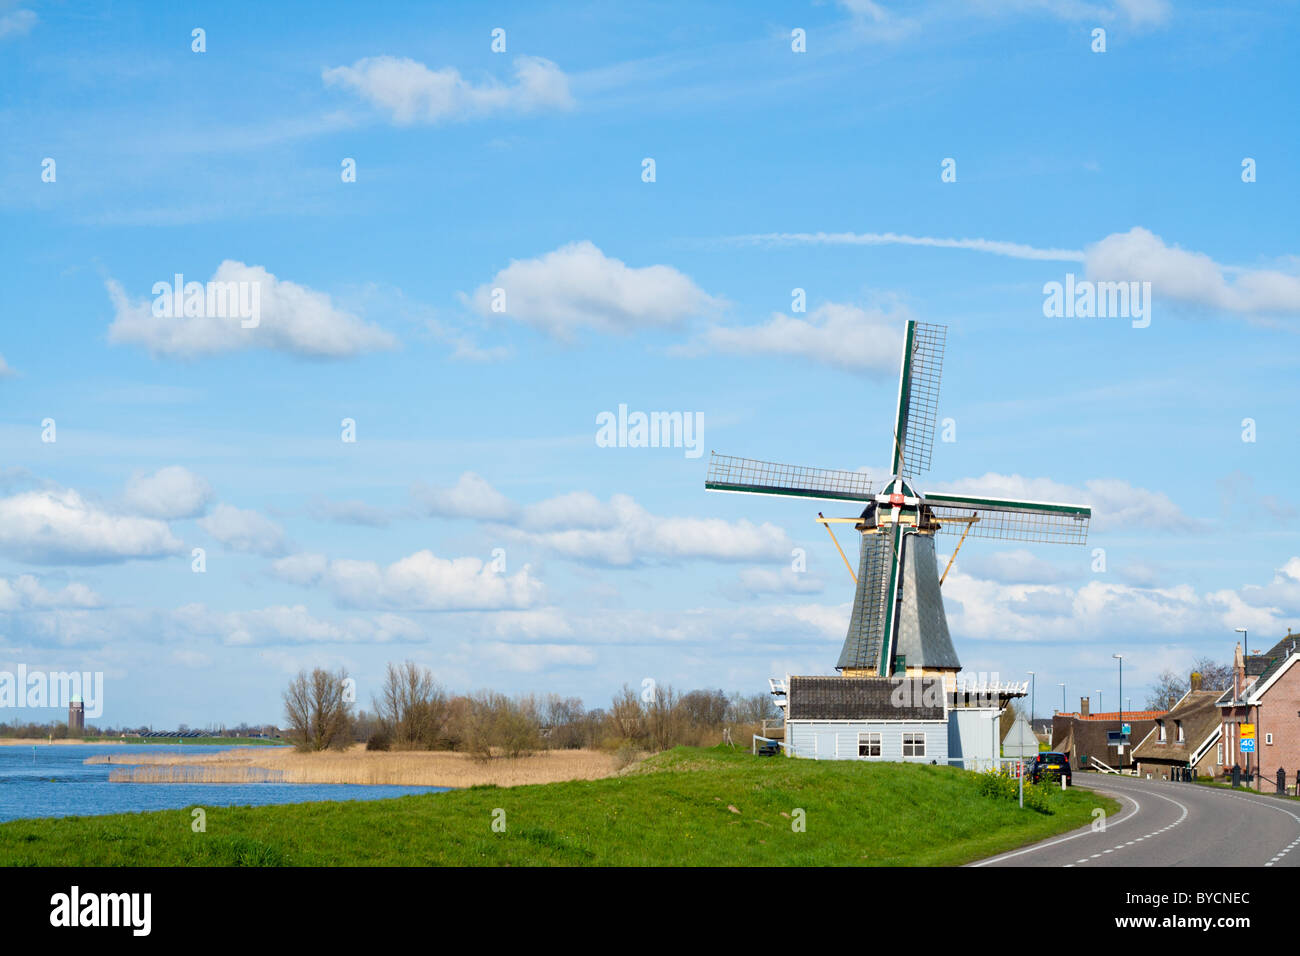 Small Dutch town next to a dyke with canal and windmill Stock Photo